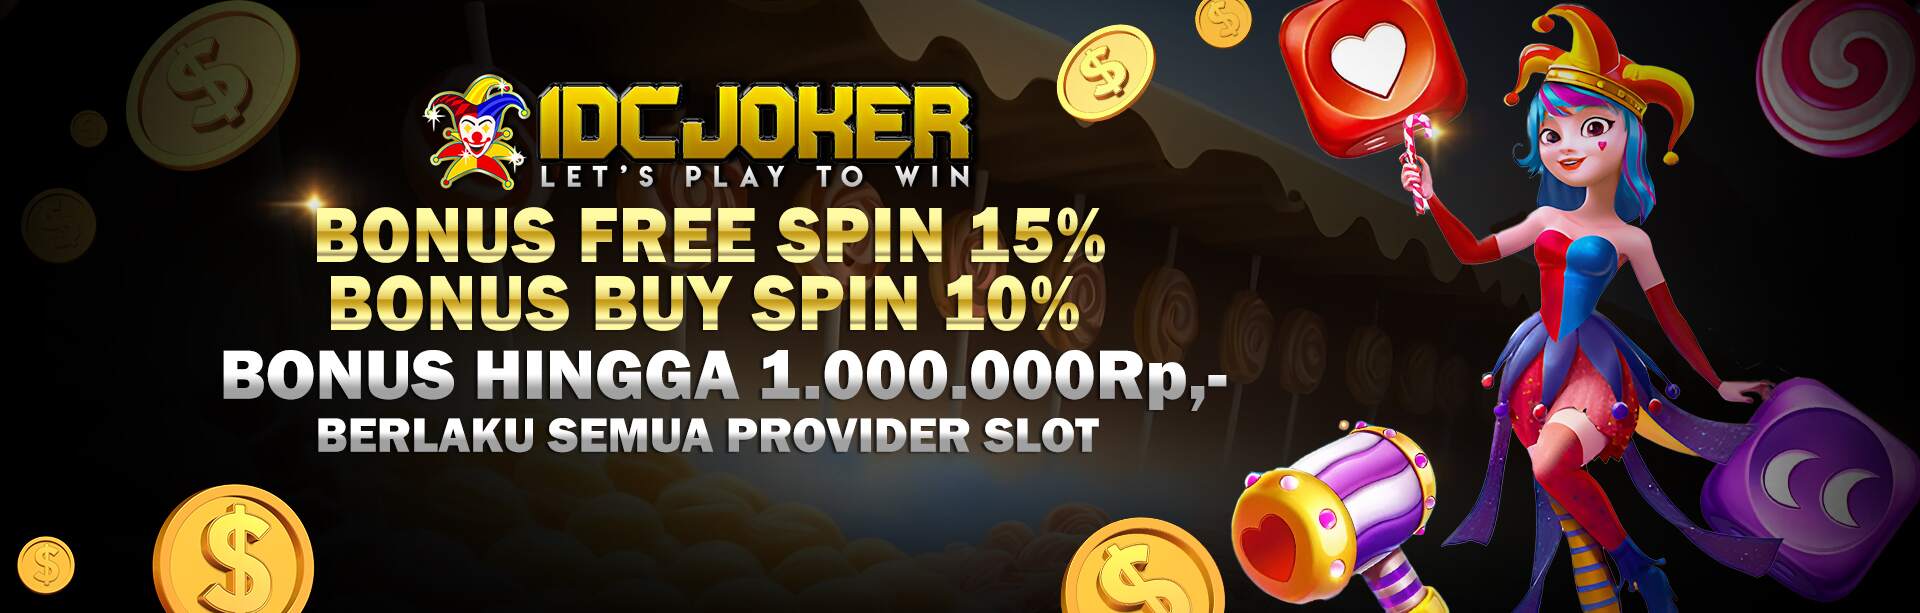 EVENT FREESPIN 15% BUY SPIN 10% IDCJOKER